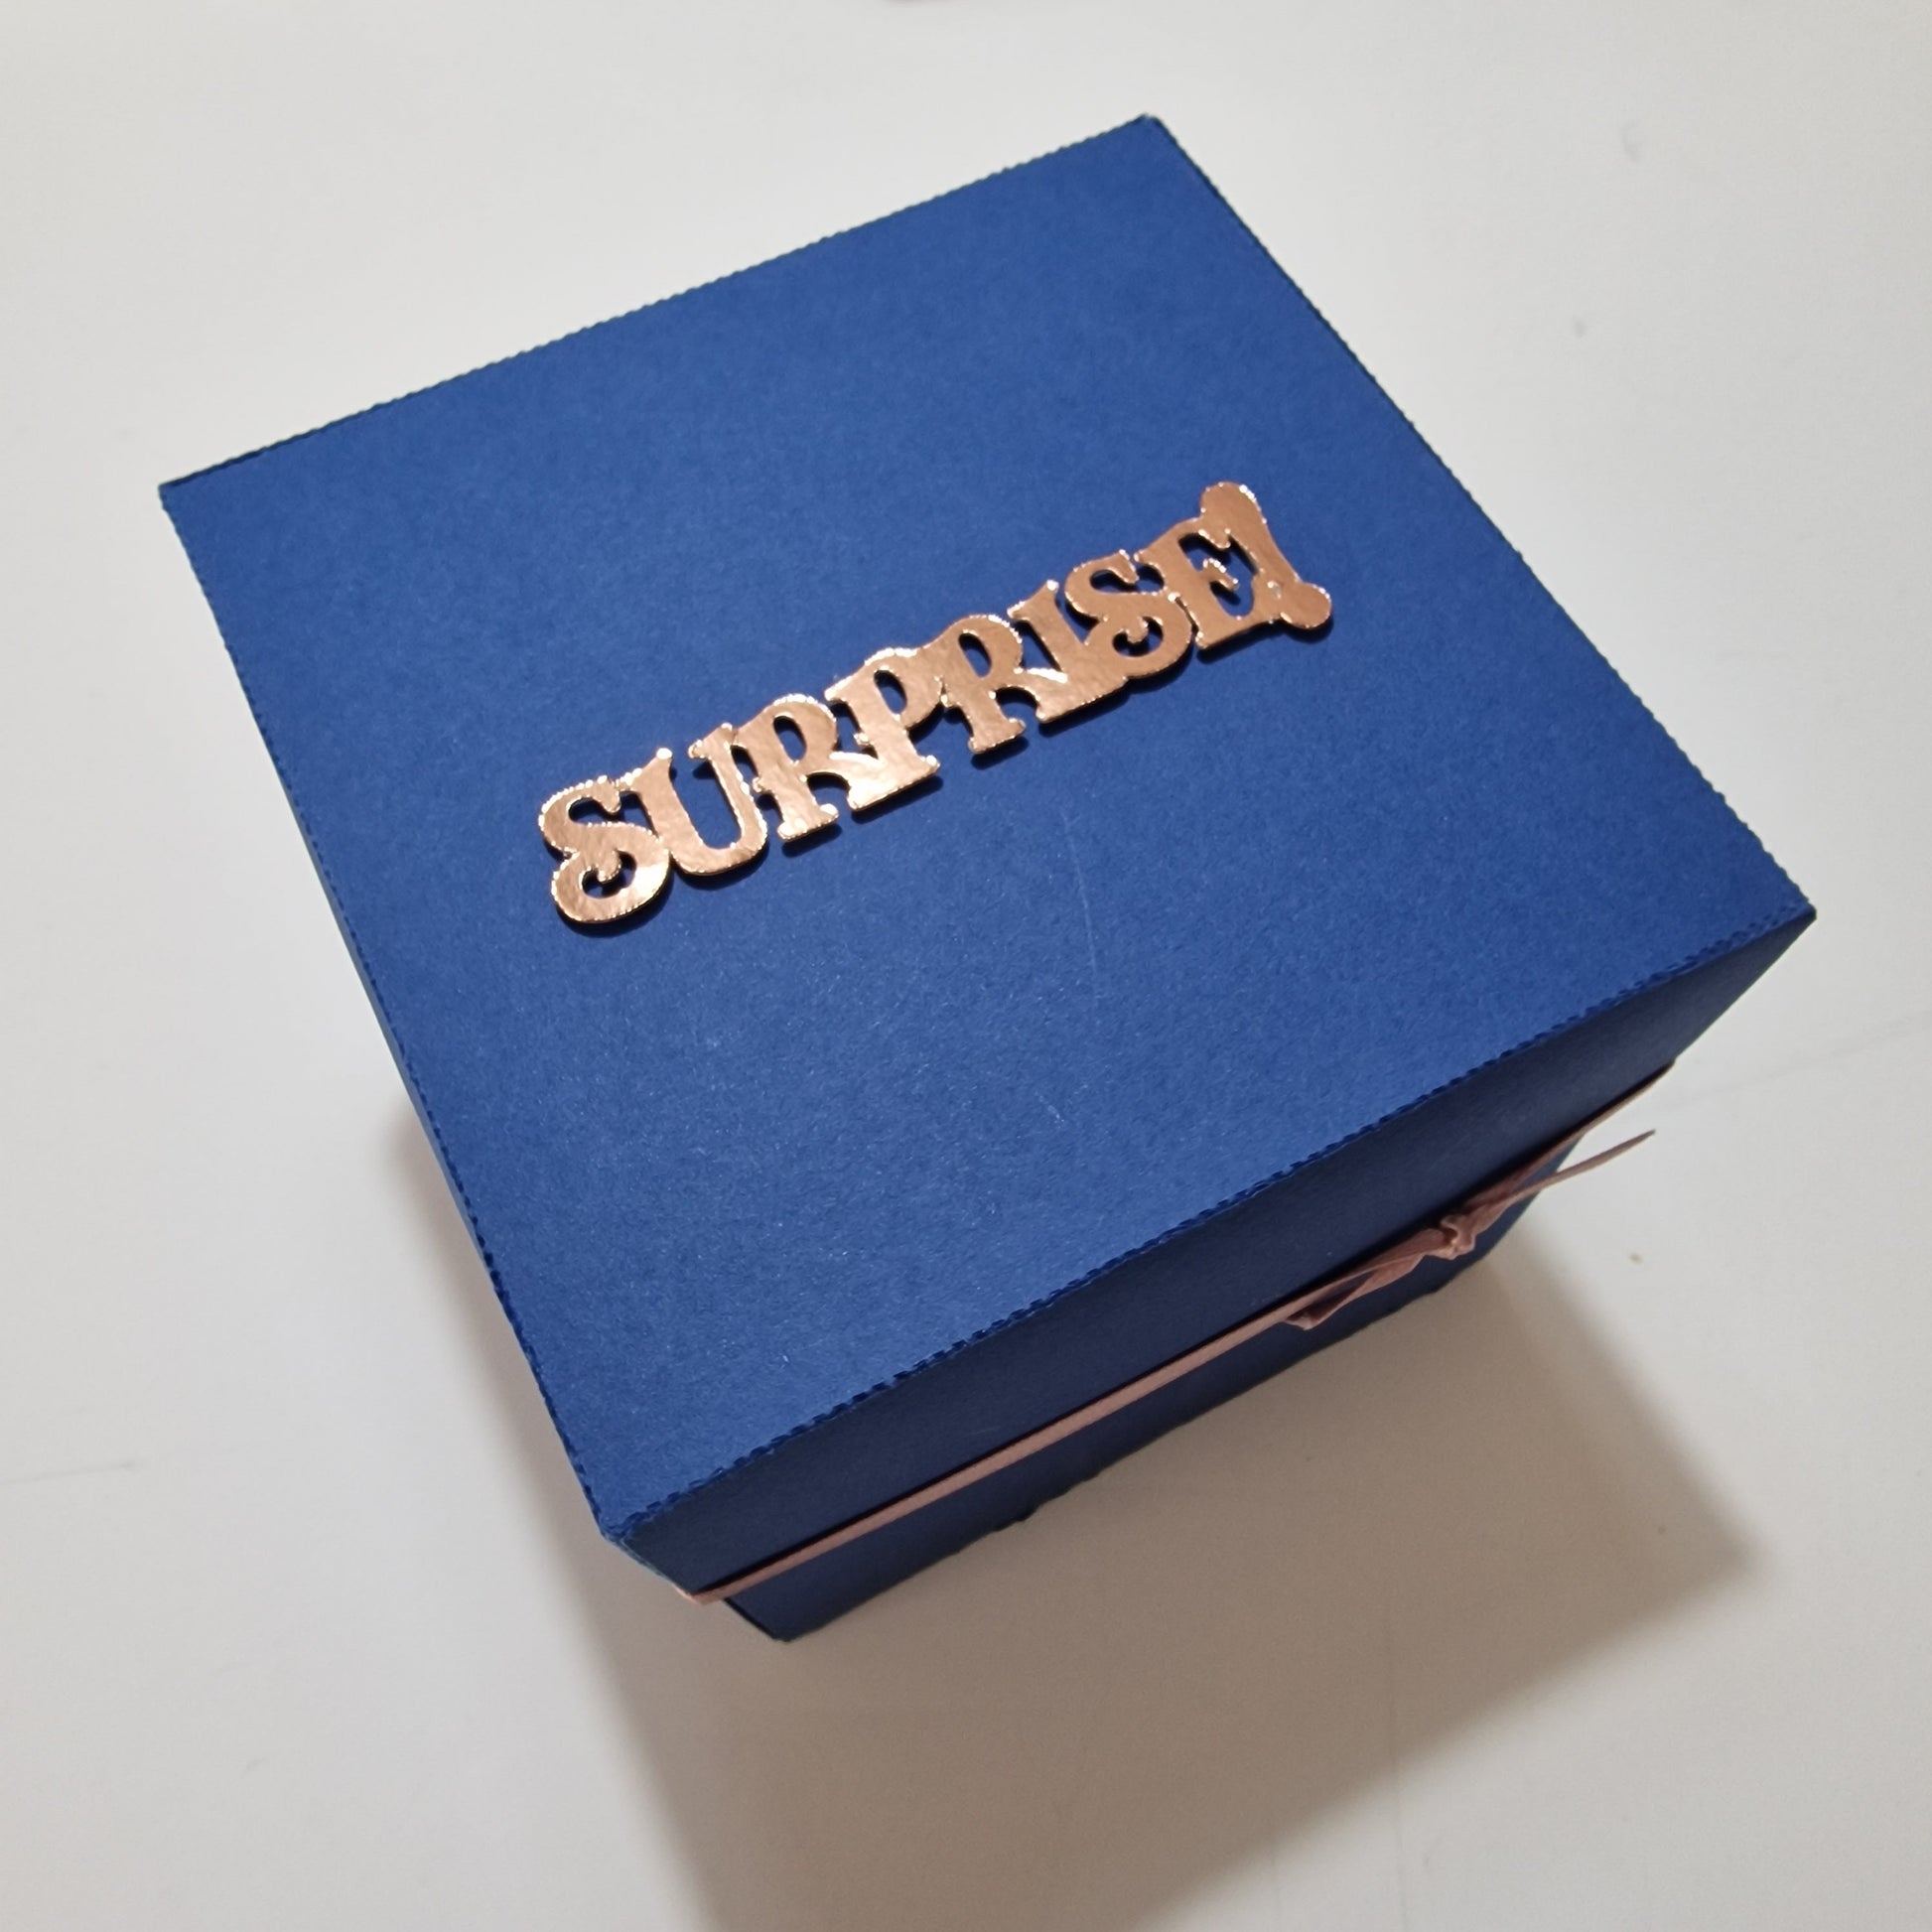 SURPRISE Navy Blue Exploding Thailand Trip Reveal Box with Rose Gold Accents. Contains all the relevant trip information